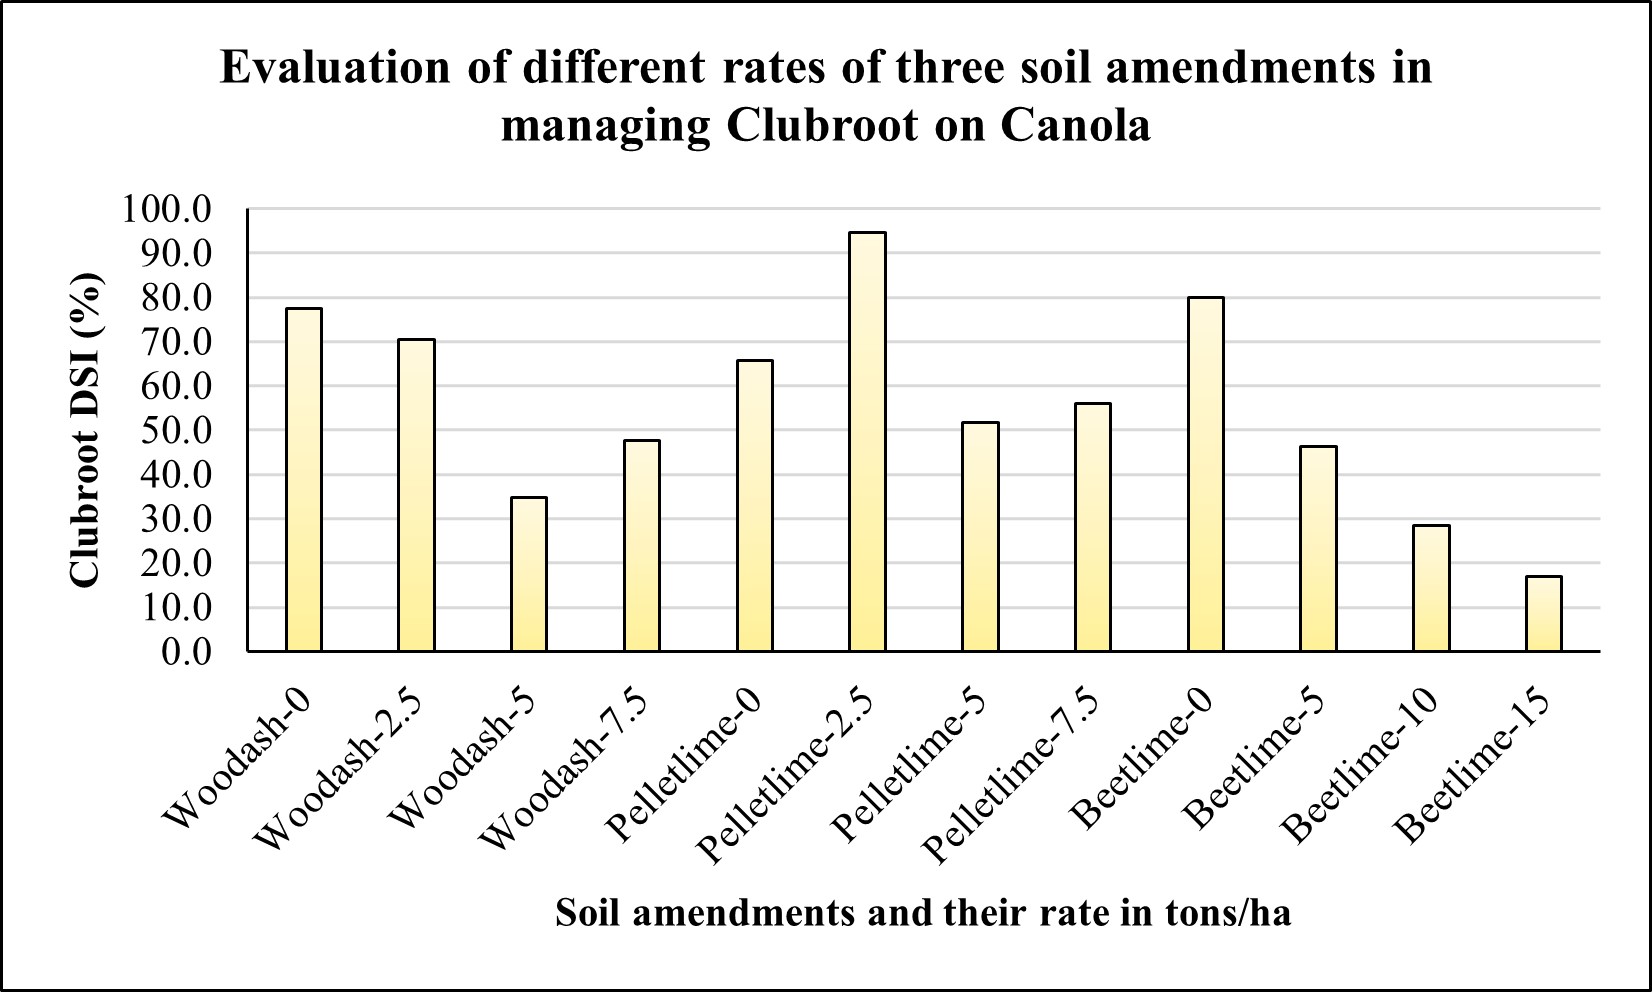 Effect of different rates of beet lime, pellet lime, and wood ash on clubroot management on canola.